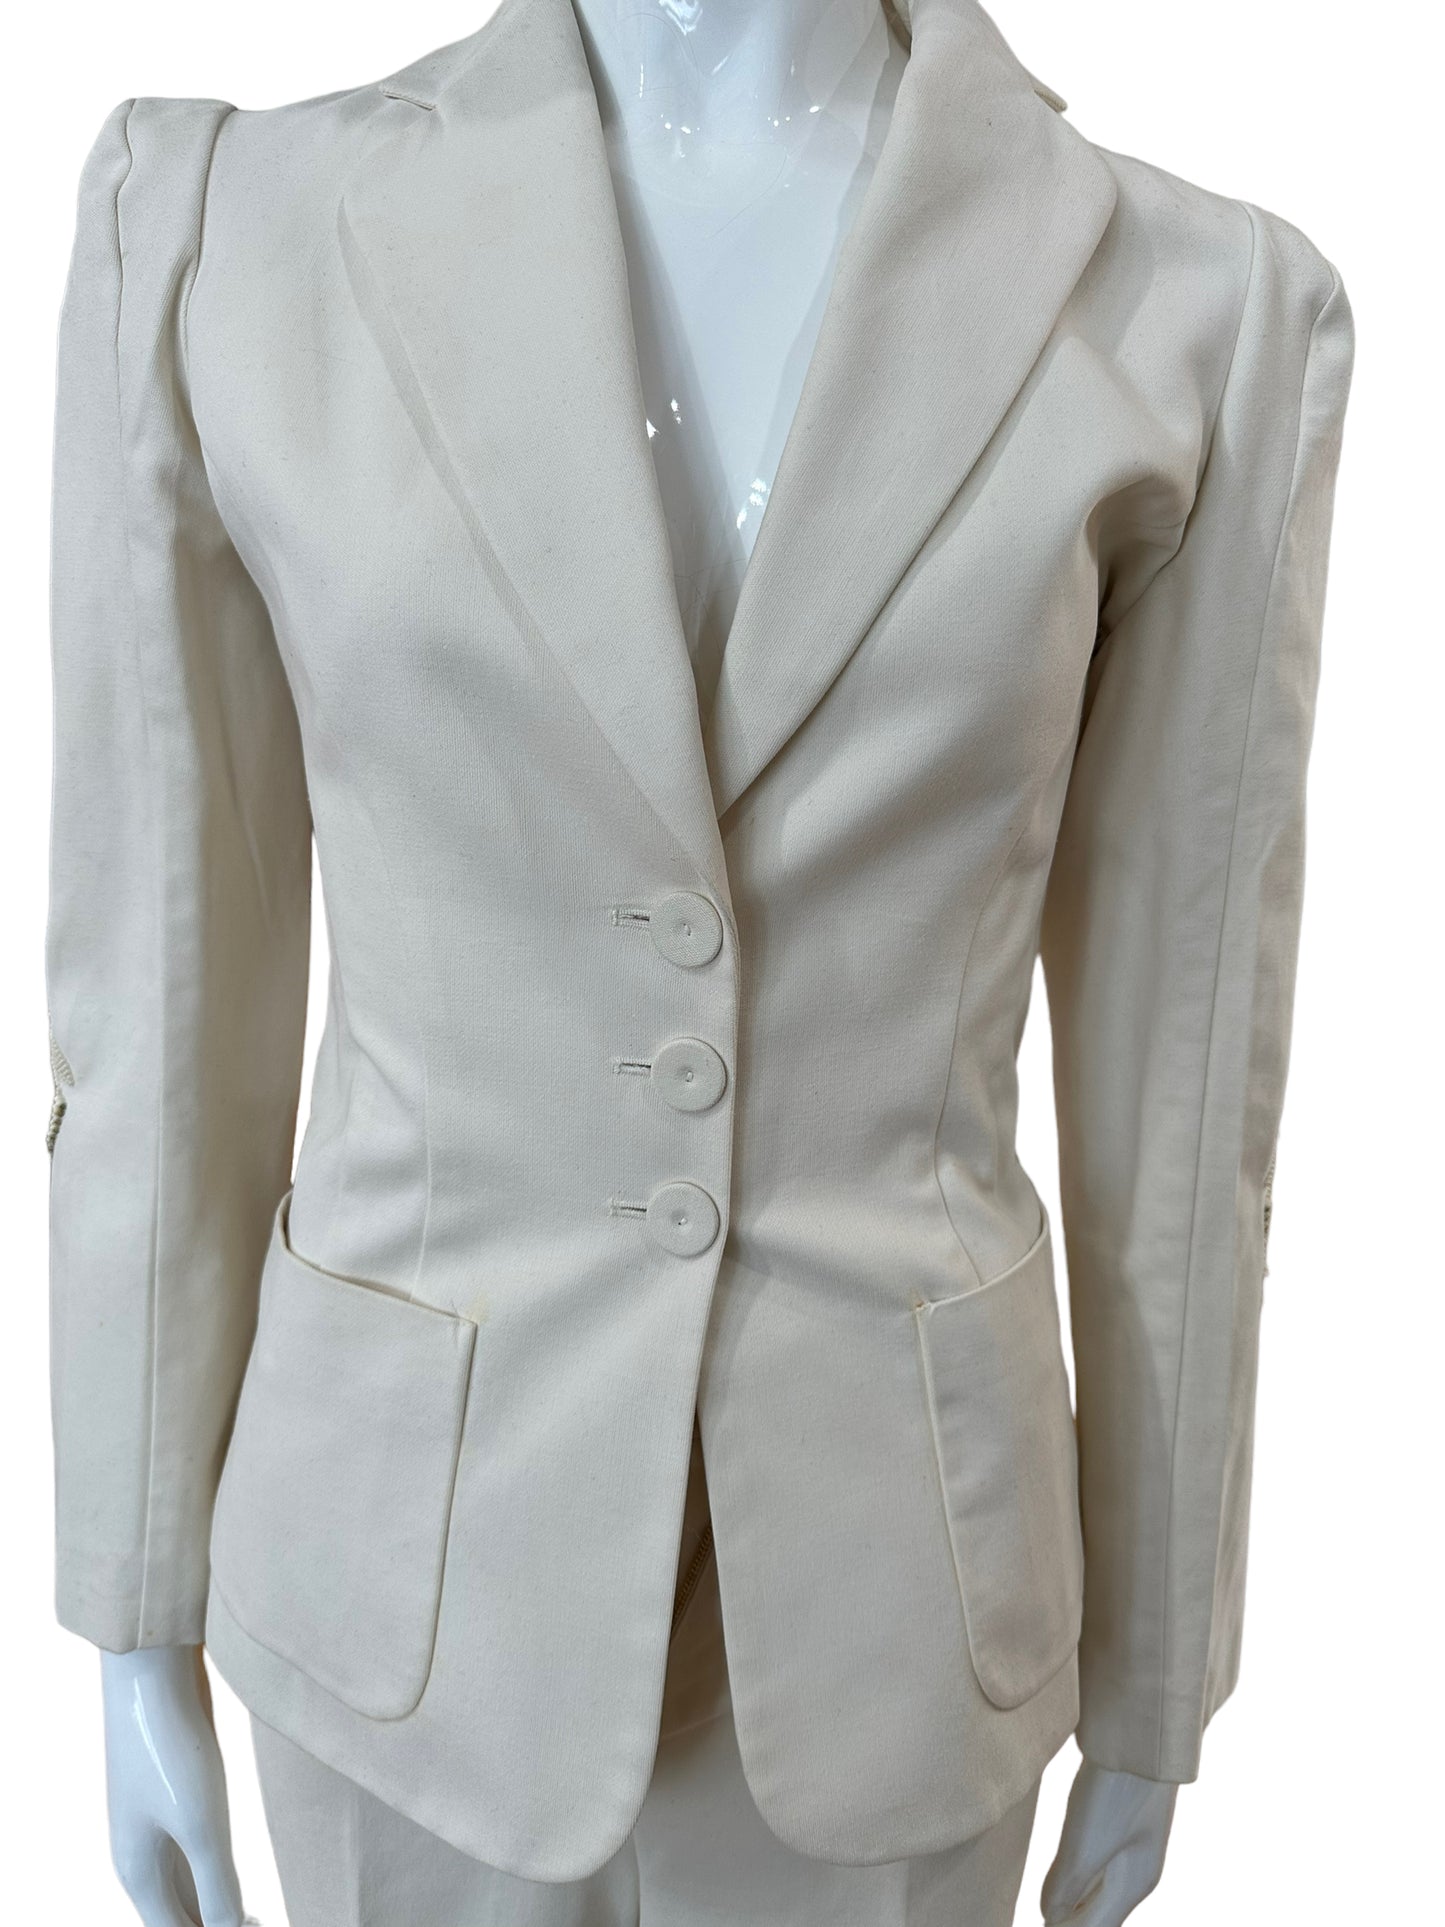 Chloe 2002 ivory cut out suit F 38 (fits like 2)